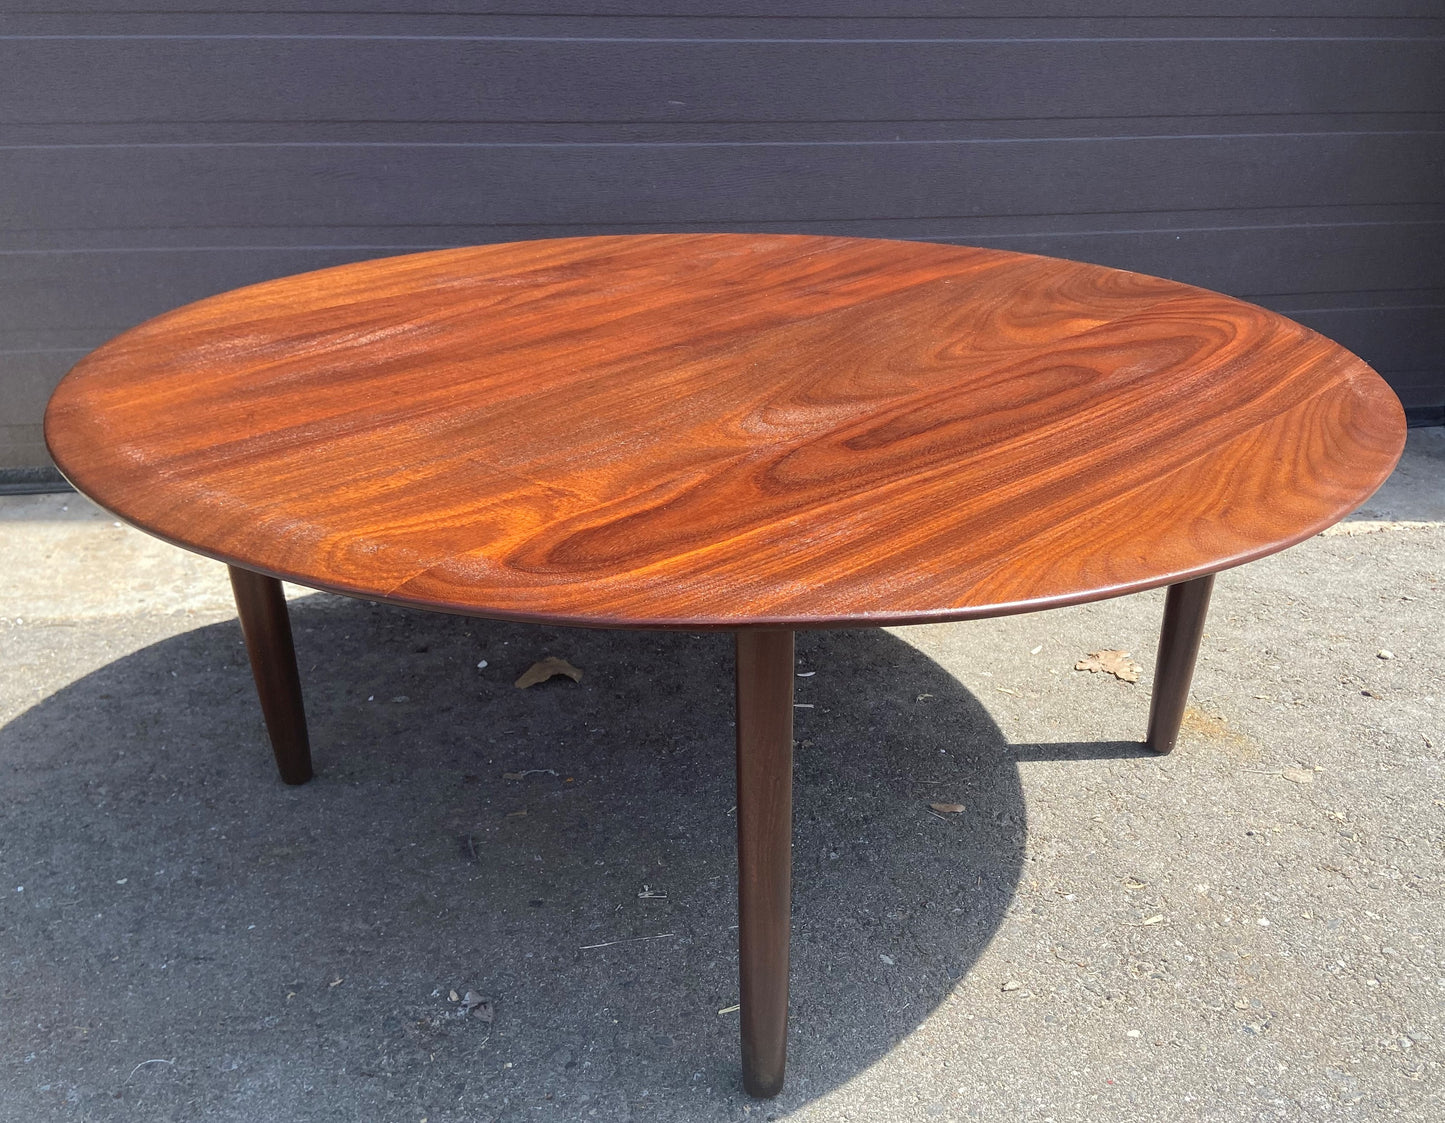 REFINISHED Mid Century Modern SOLID Teak Coffee Table Round by Imperial